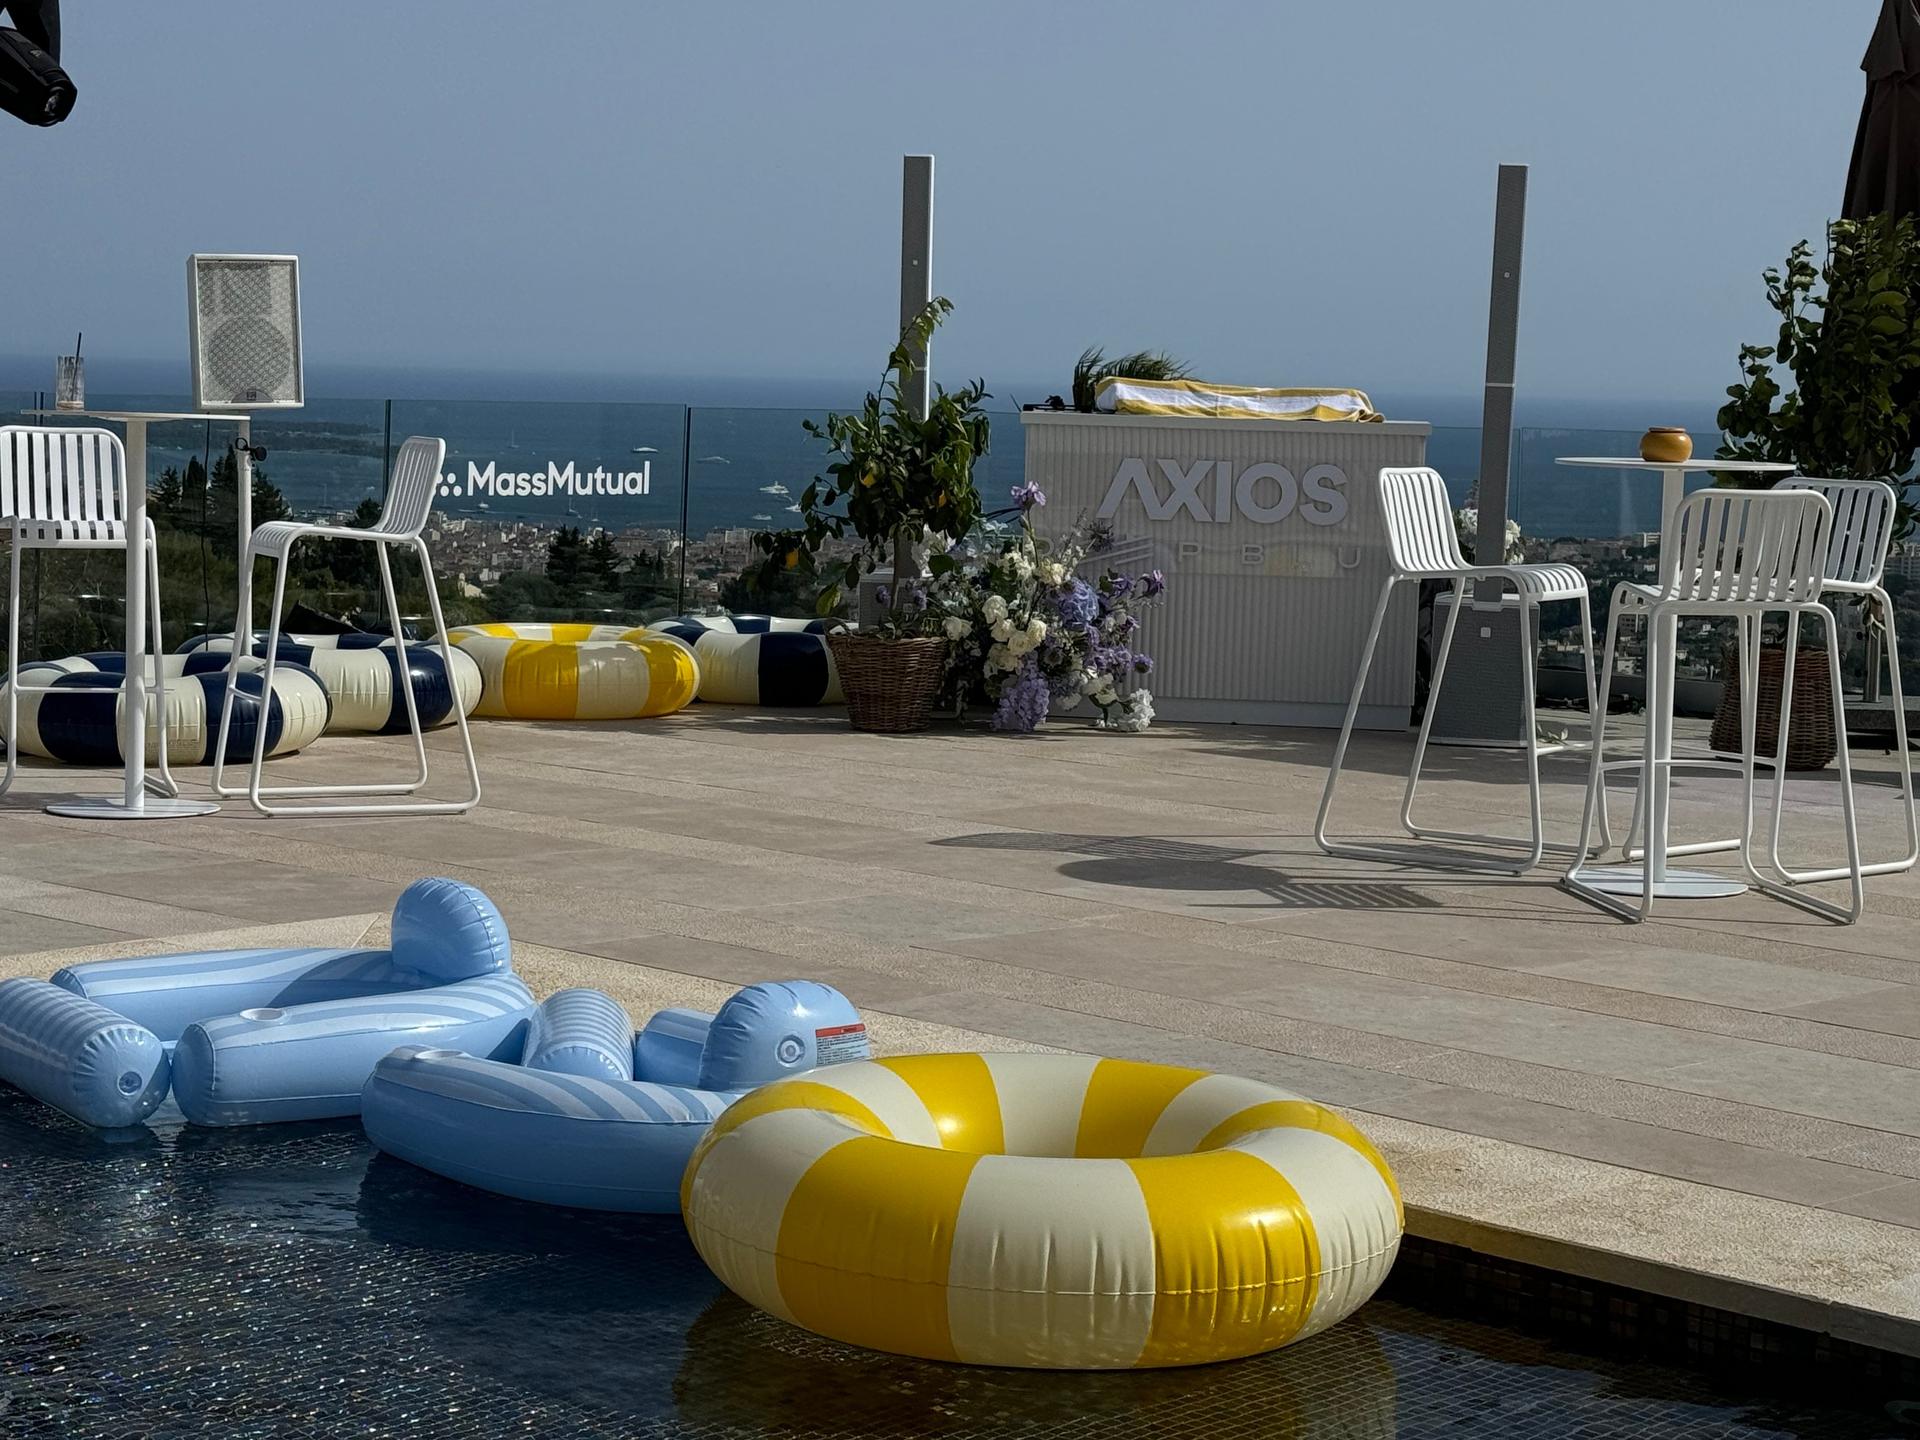 Image of a pool with pool floaties inside taken at the Axios Sports House at the Cannes Lions festival.